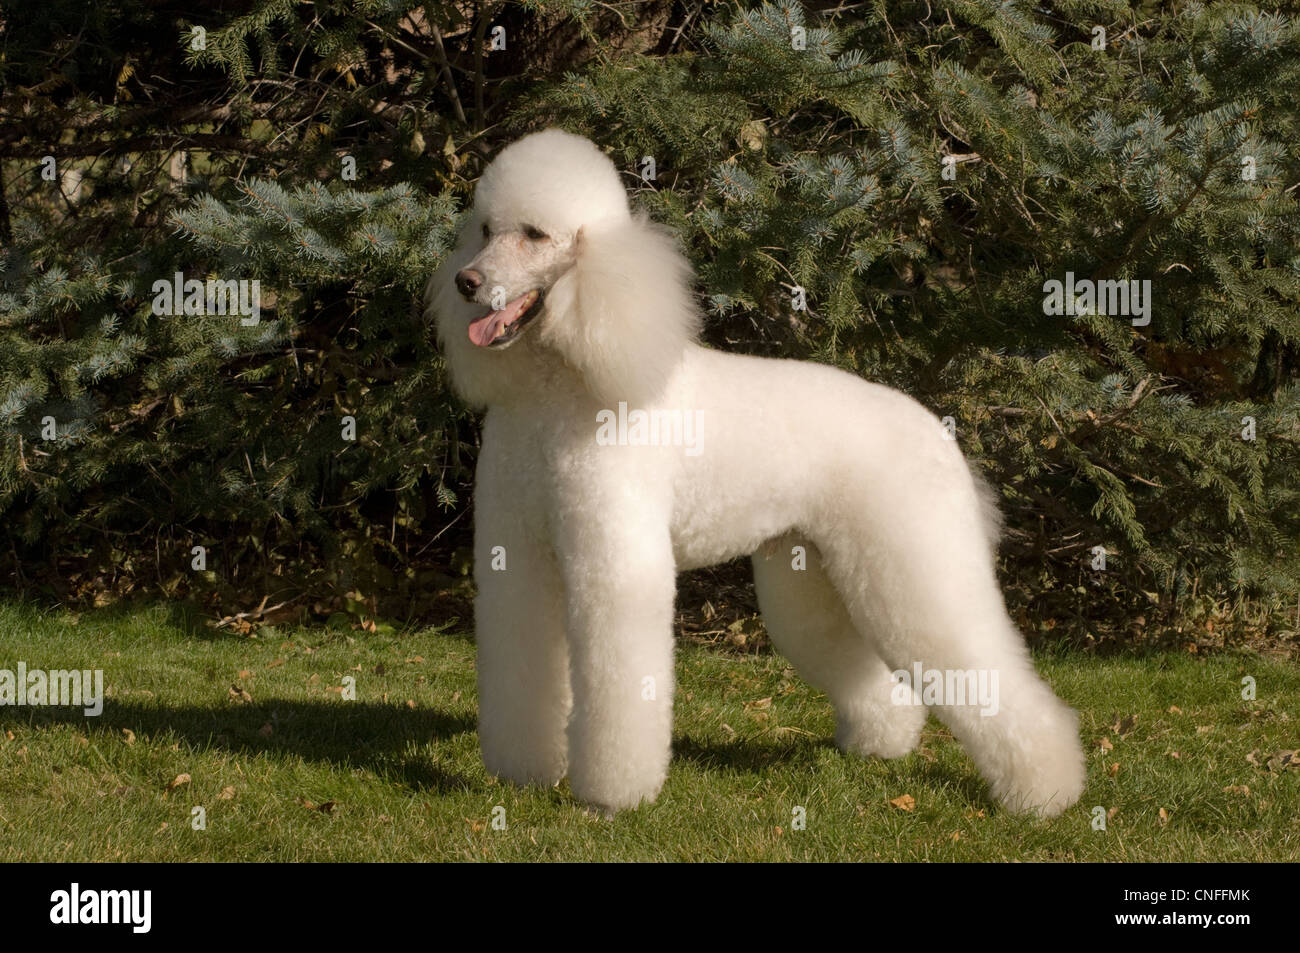 French Poodle standing in grass Stock Photo